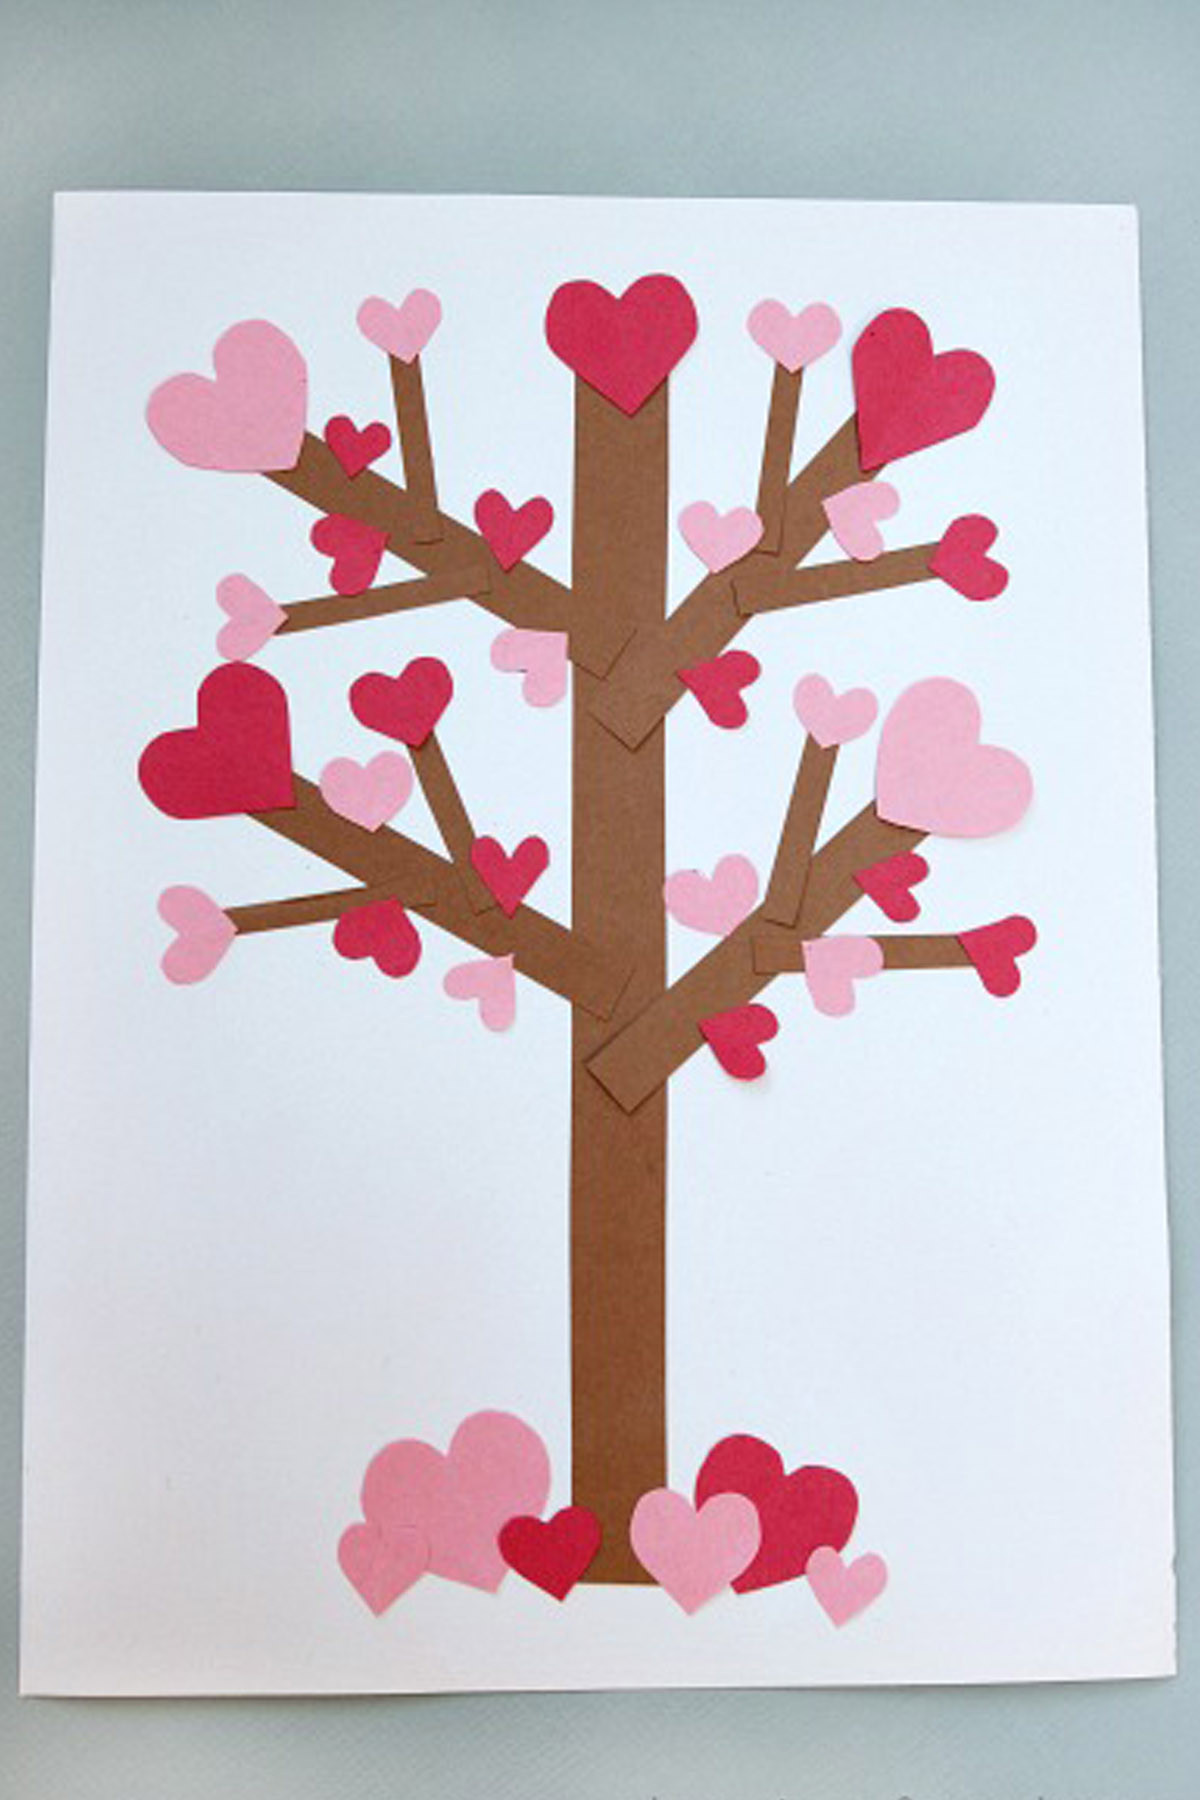 Toddler Valentines Craft Ideas
 20 Valentine s Day Crafts for Kids Fun Heart Arts and